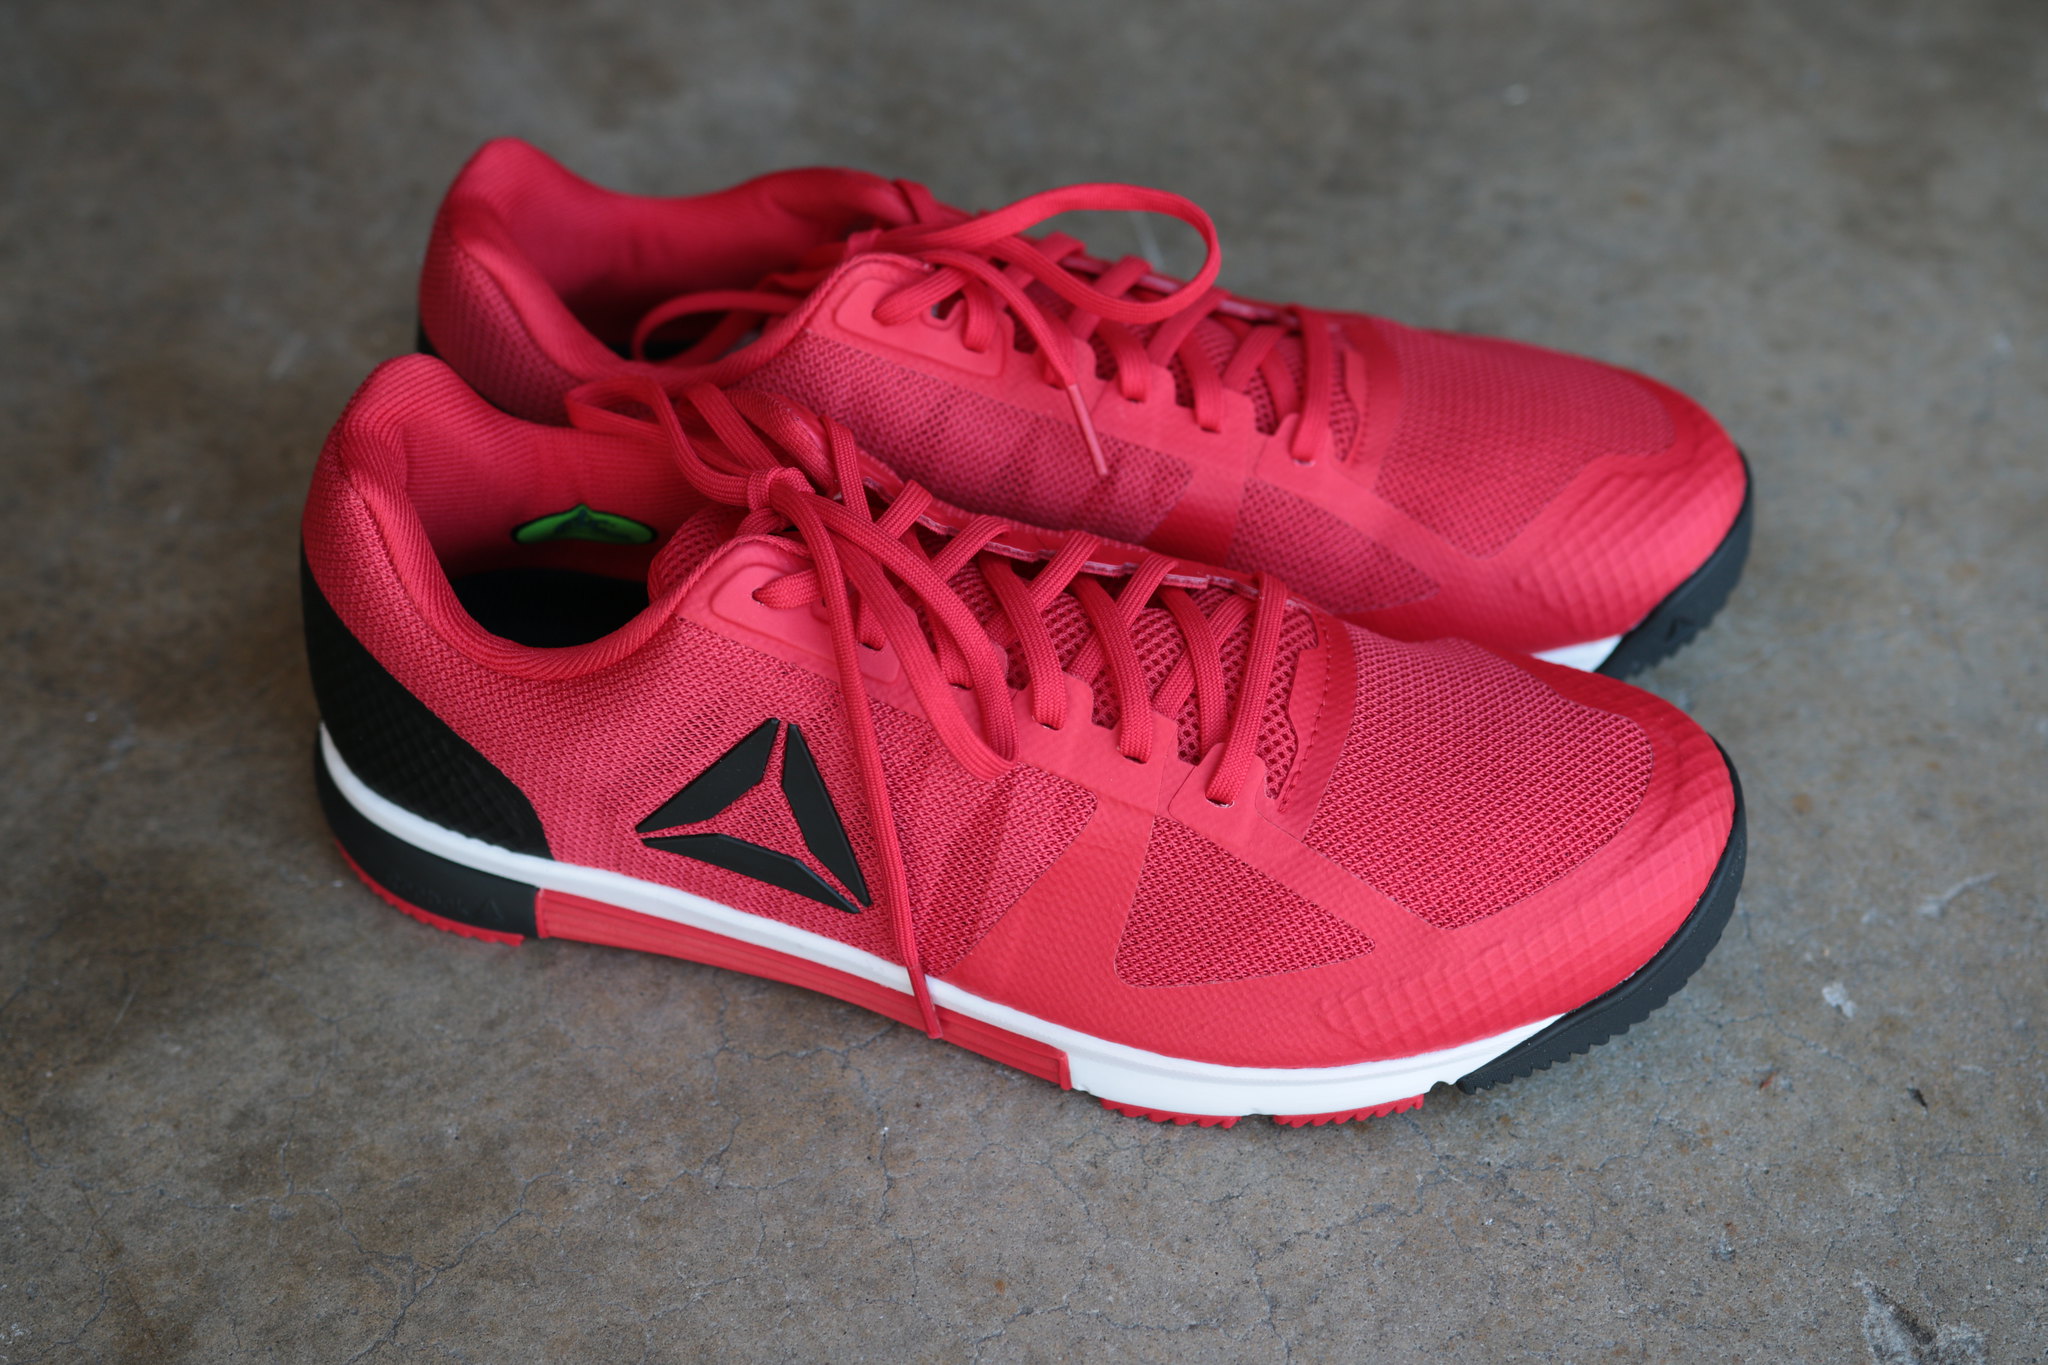 Cater Harde wind Ezel Reebok CrossFit Speed TR 2.0 Review |As Many Reviews As Possible